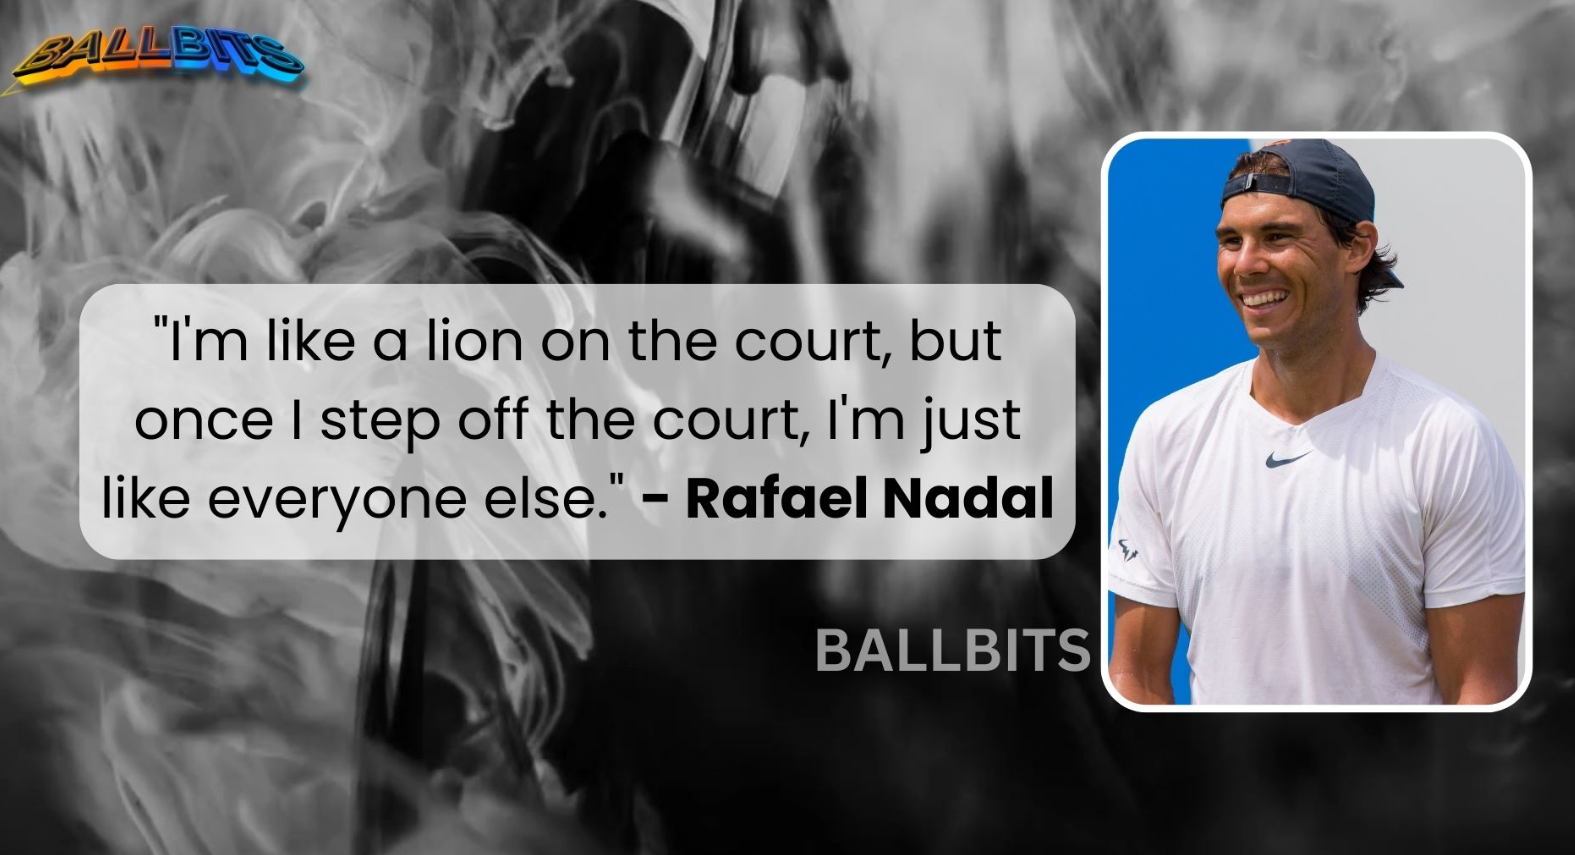 "I'm like a lion on the court, but once I step off the court, I'm just like everyone else." - Rafael Nadal